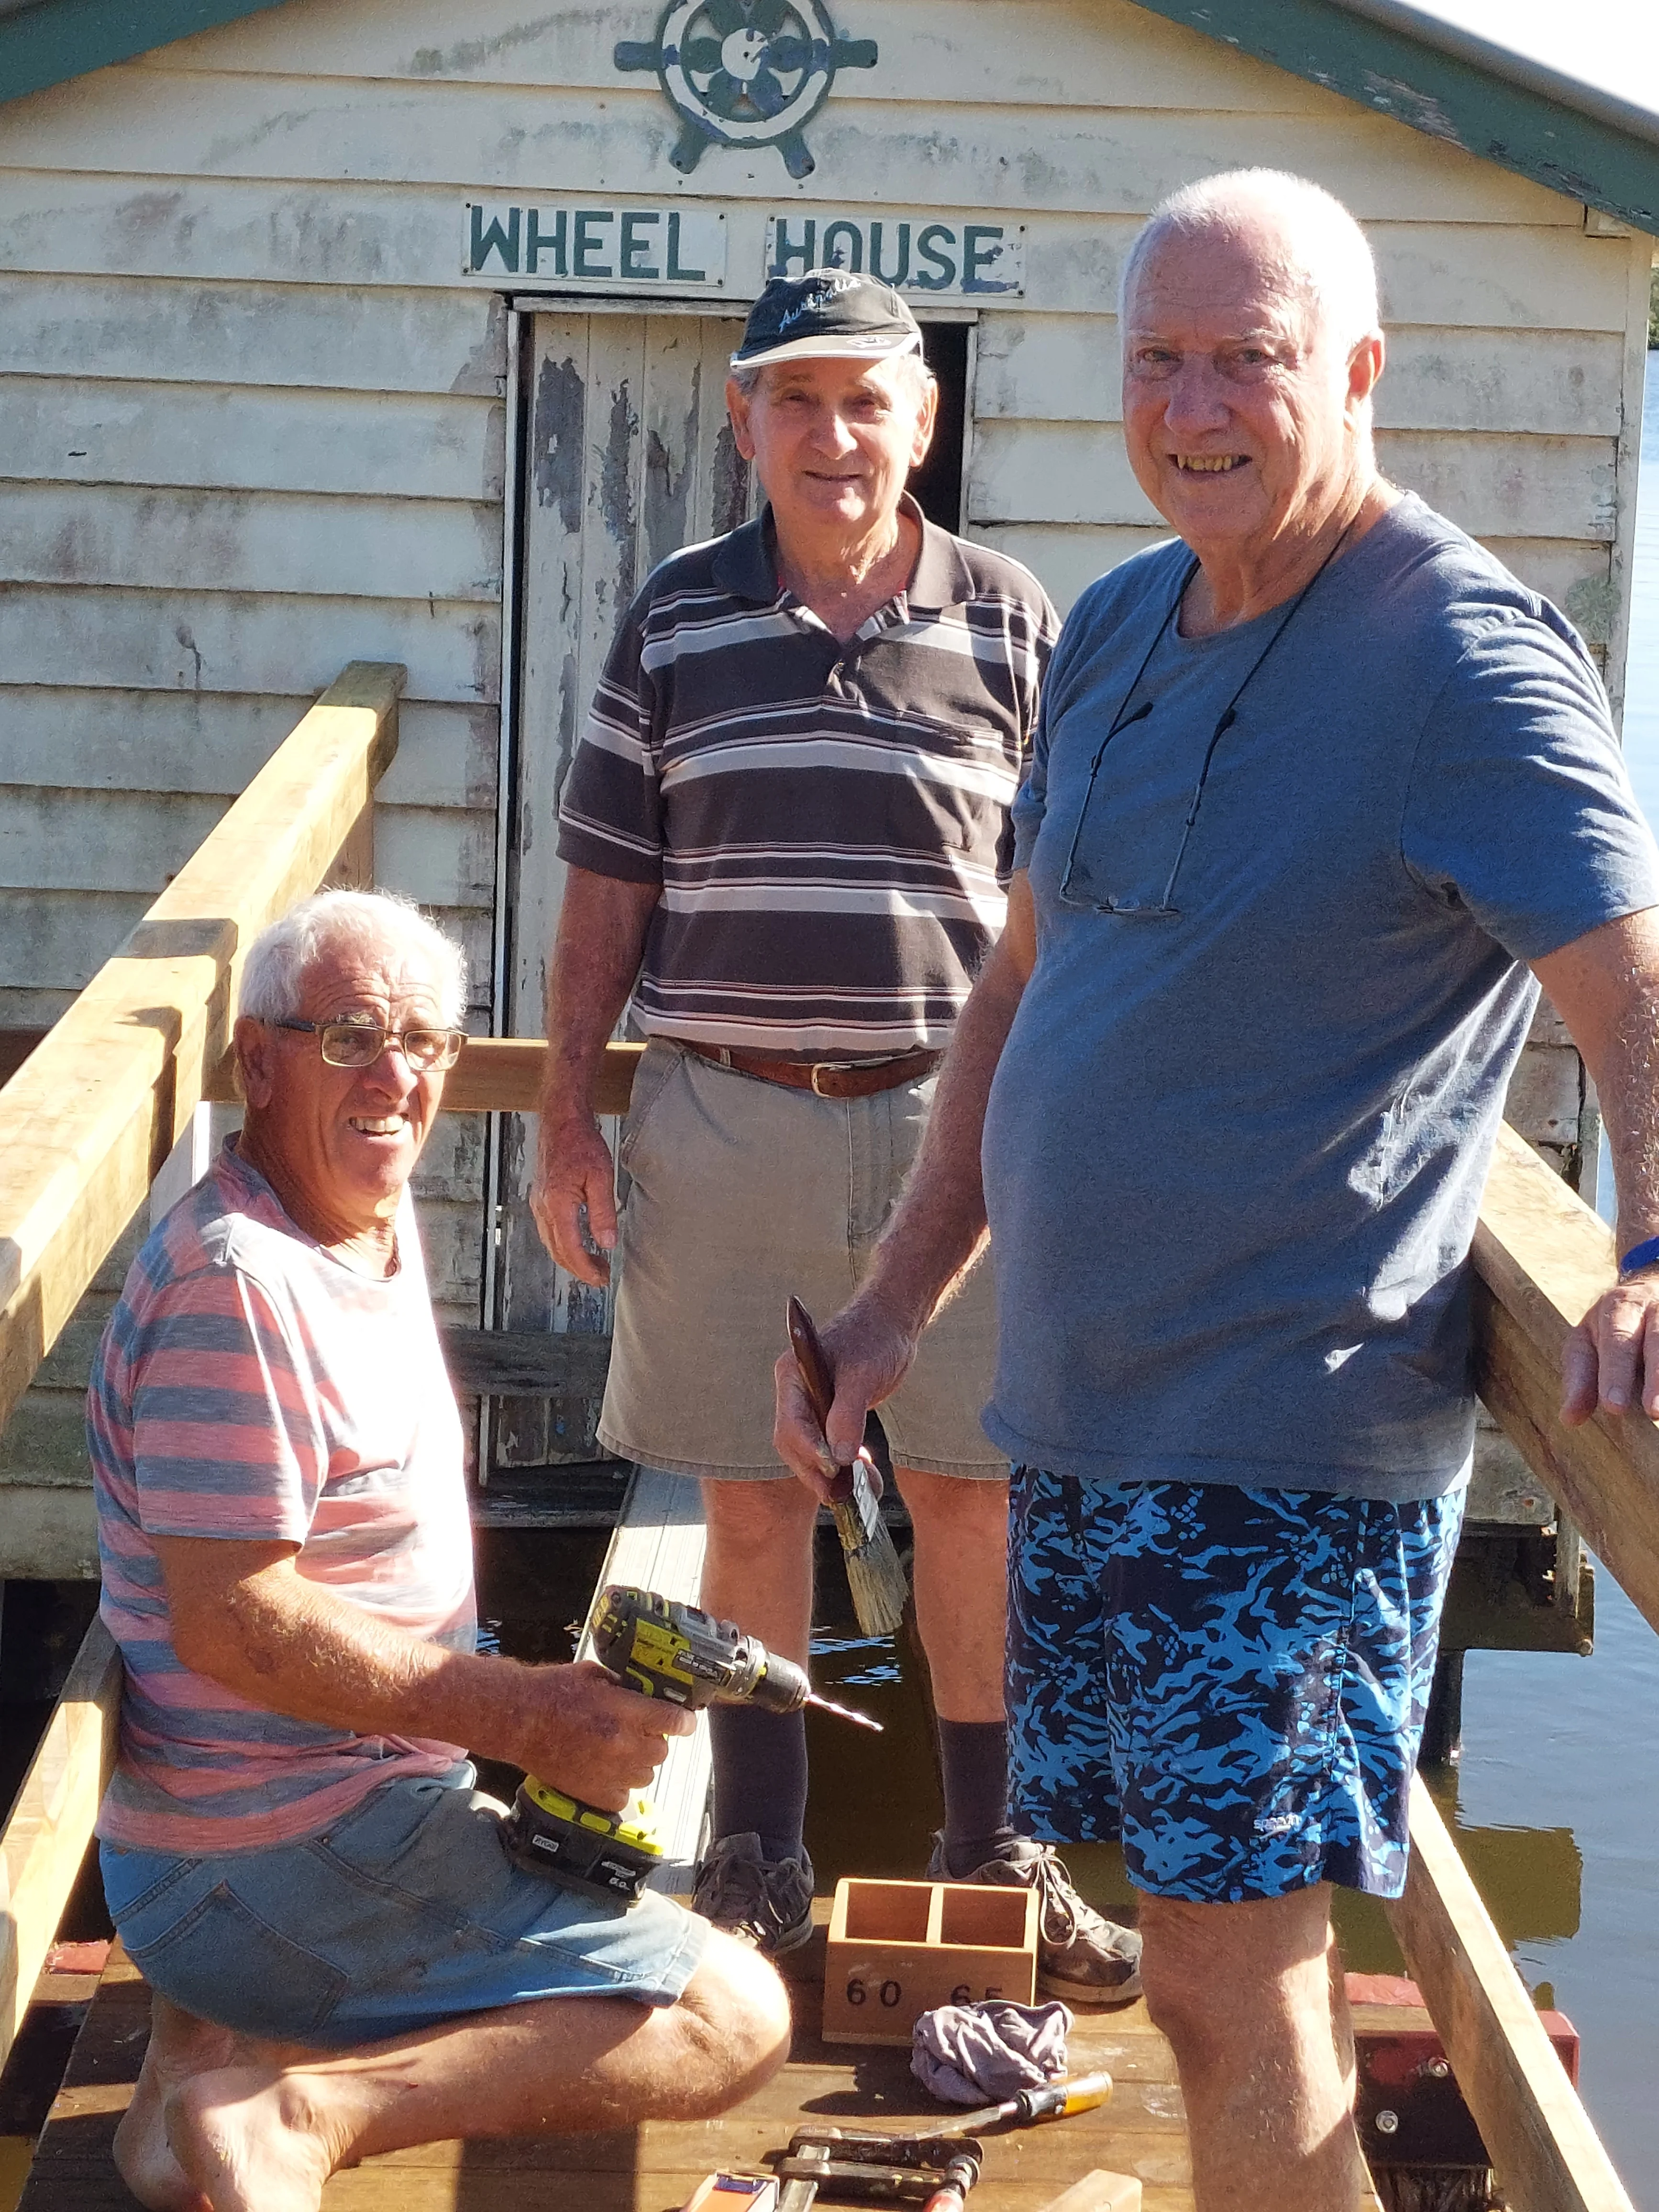 Volunteers from the Buderm Mens Shed restore Maroochy Wheel House